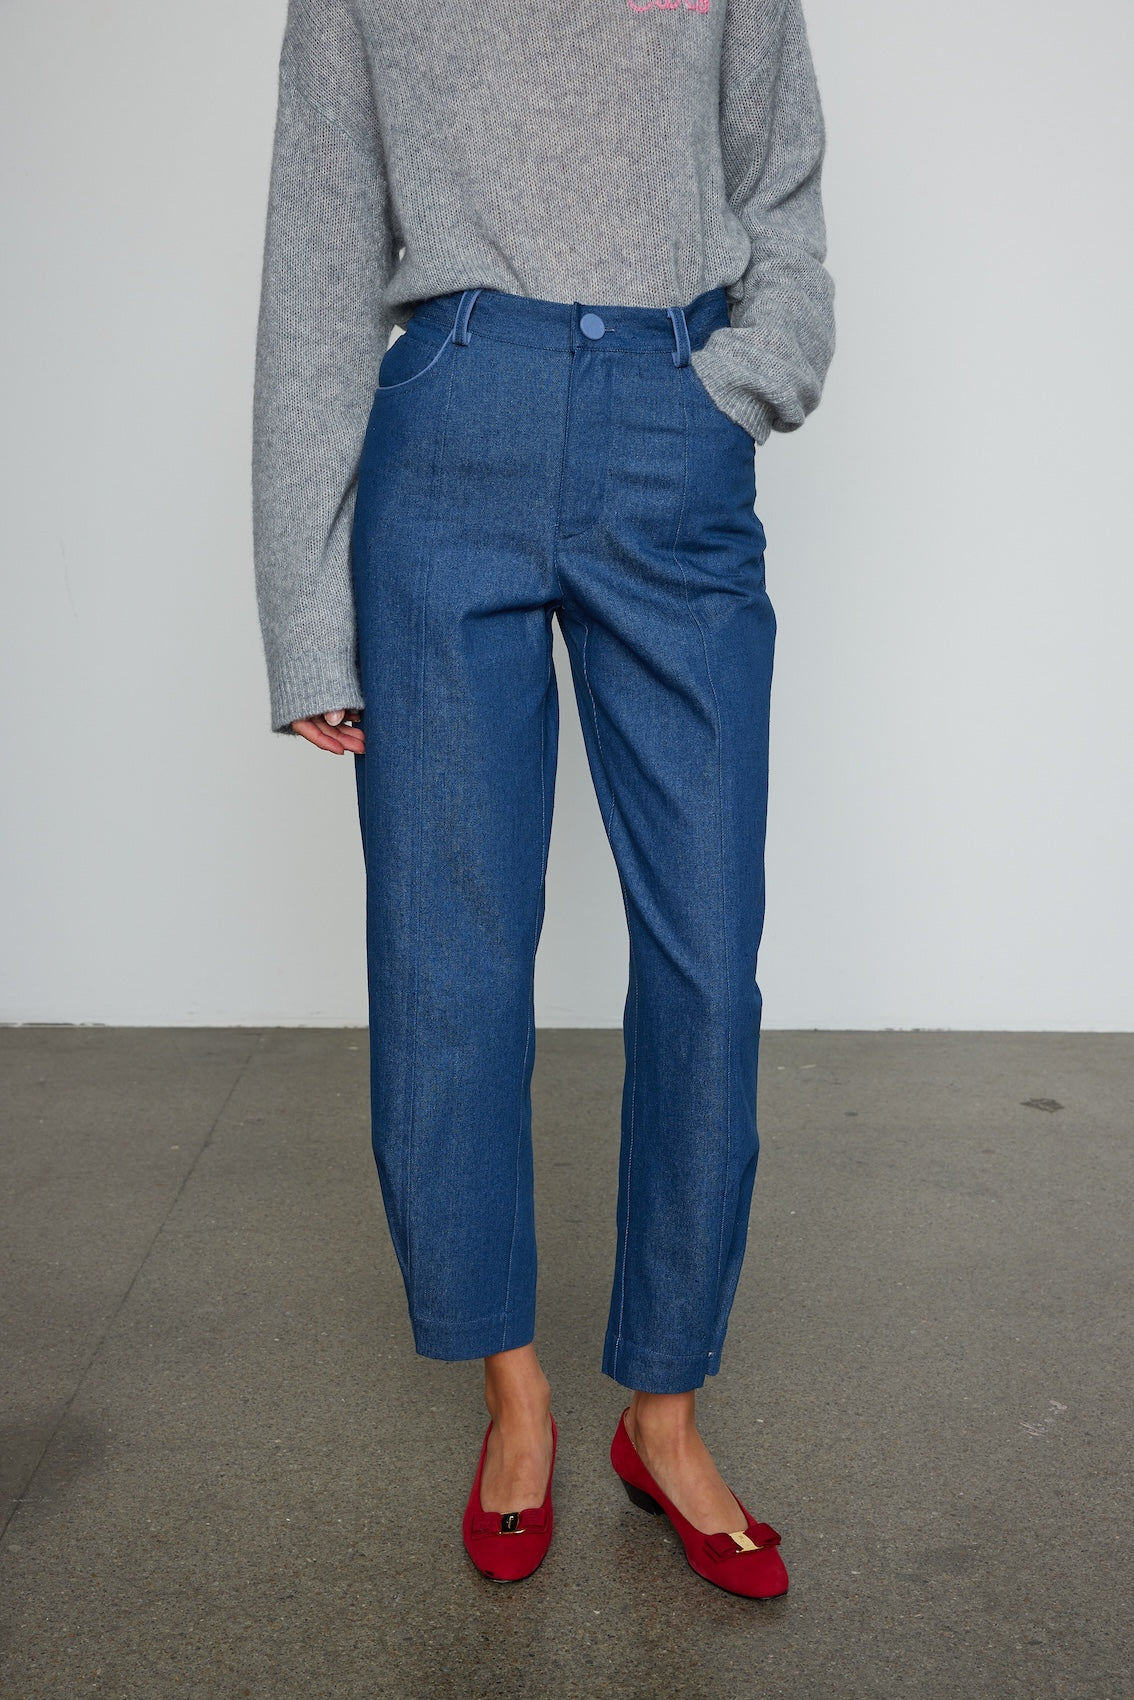 Caro Editions Emma Pants in Indigo Denim. The pants feature cargo details on the side and large pockets with piping details in a contrasting color. Easily modify the shape of the pants with a button adjustment. Style them with a t-shirt, blouse, or a matching Emma Jacket.